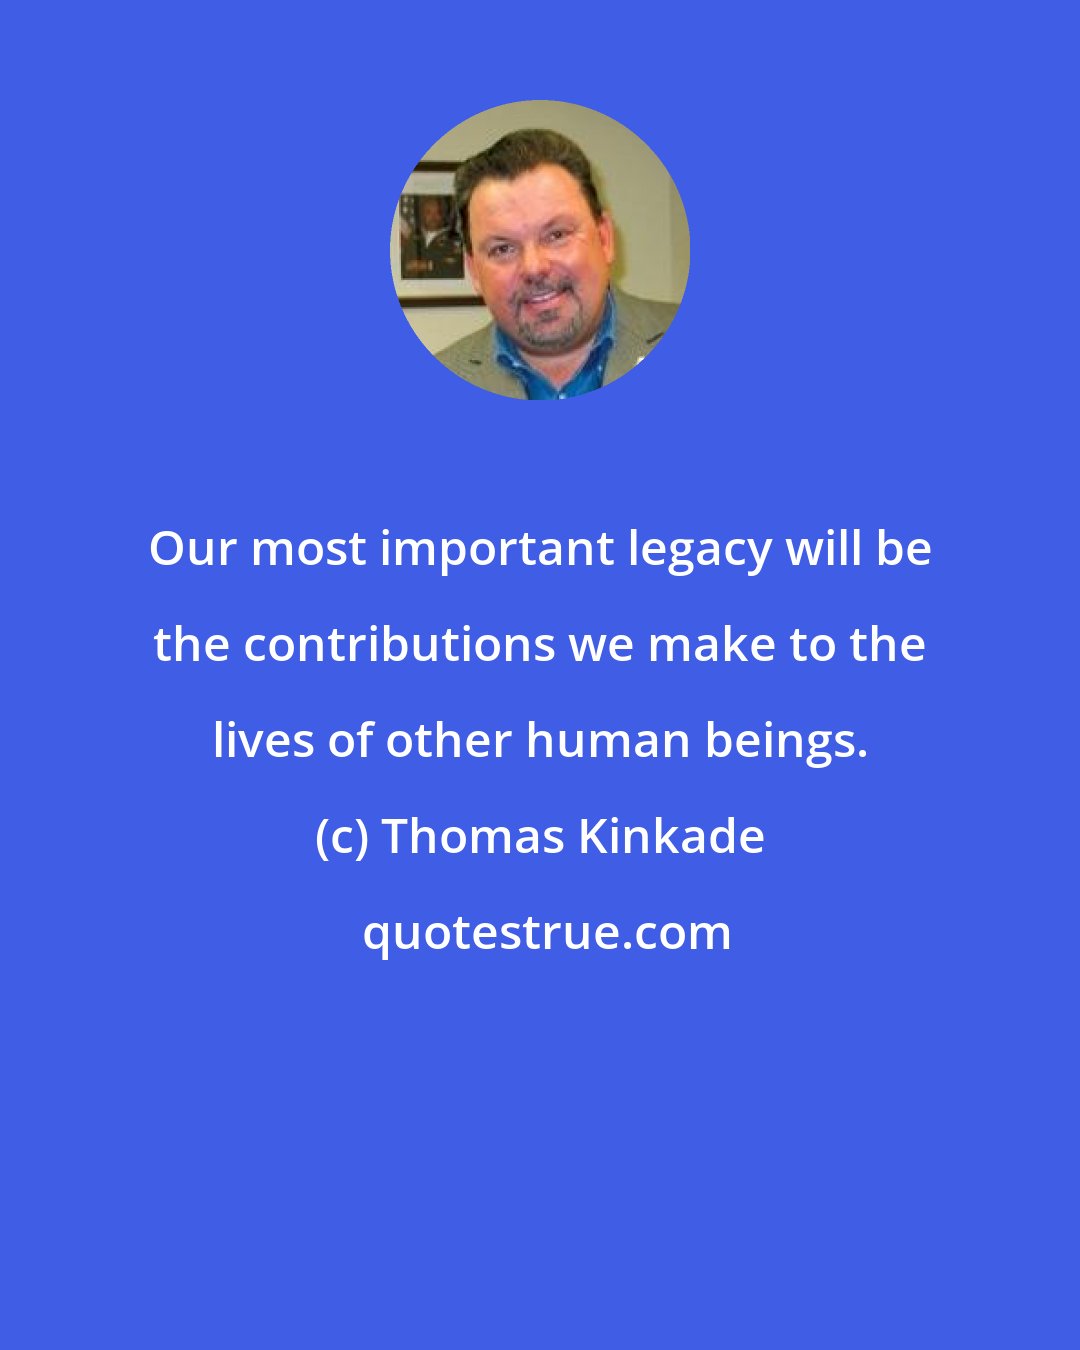 Thomas Kinkade: Our most important legacy will be the contributions we make to the lives of other human beings.